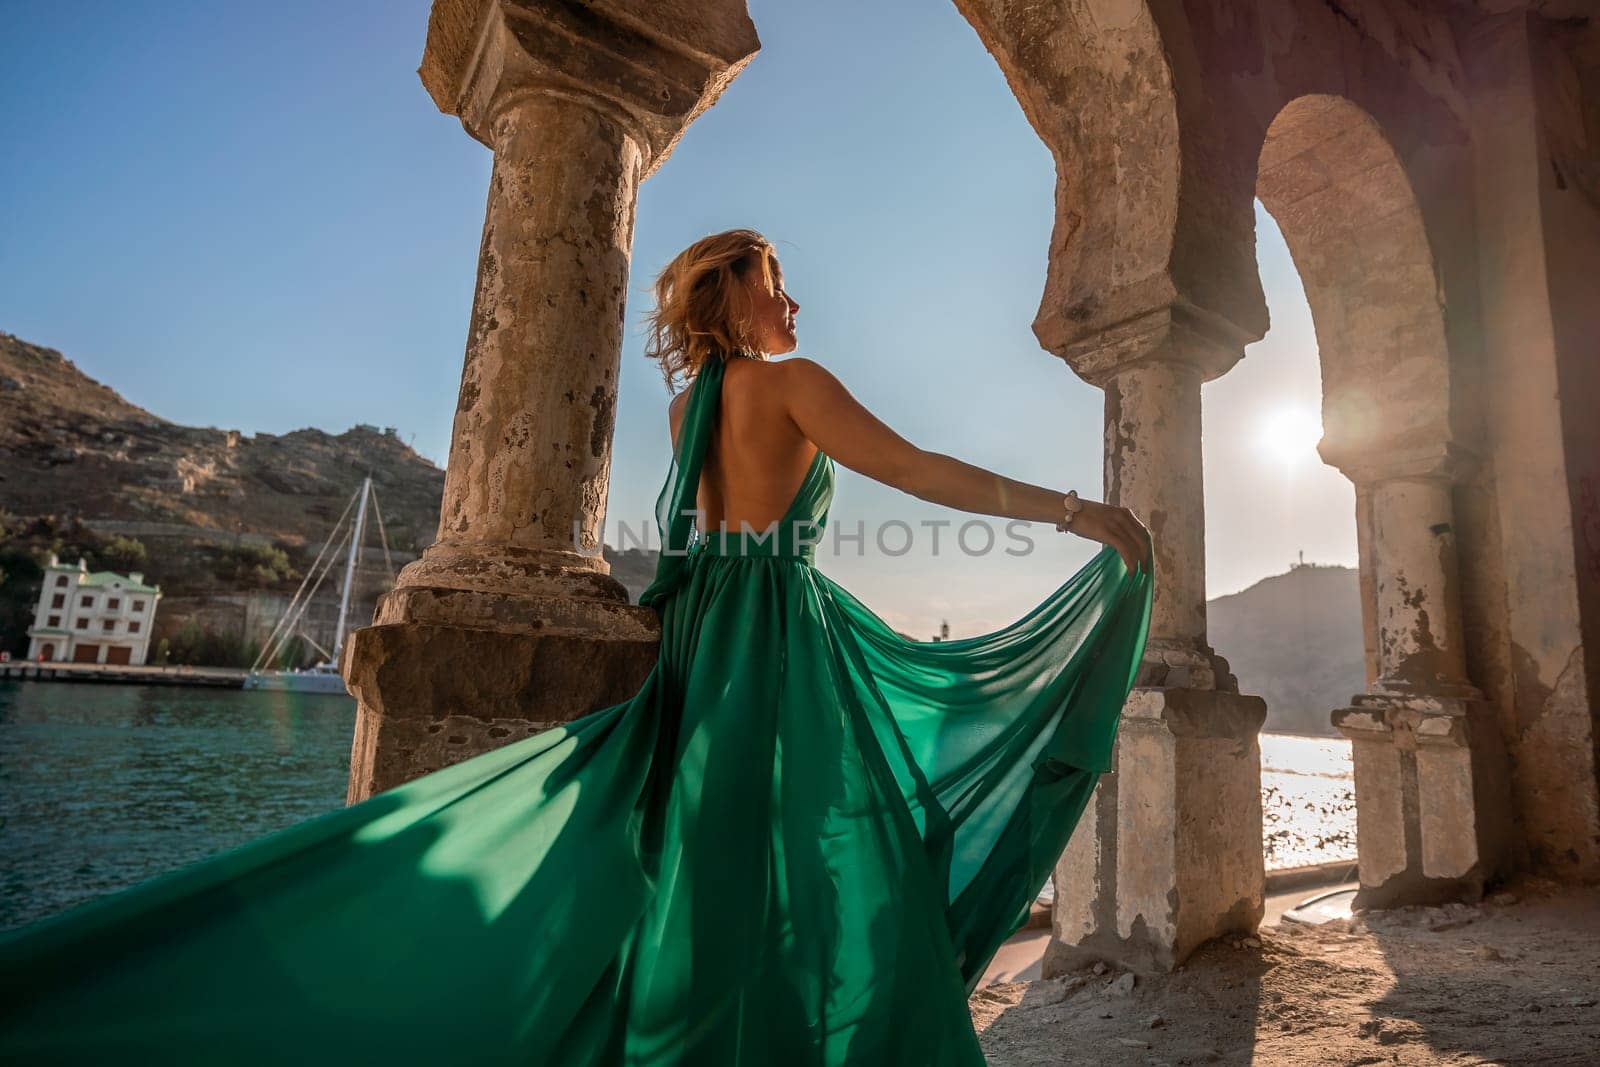 Woman dress sea columns. Rear view of a happy blonde woman in a long mint dress posing against the backdrop of the sea in an old building with columns